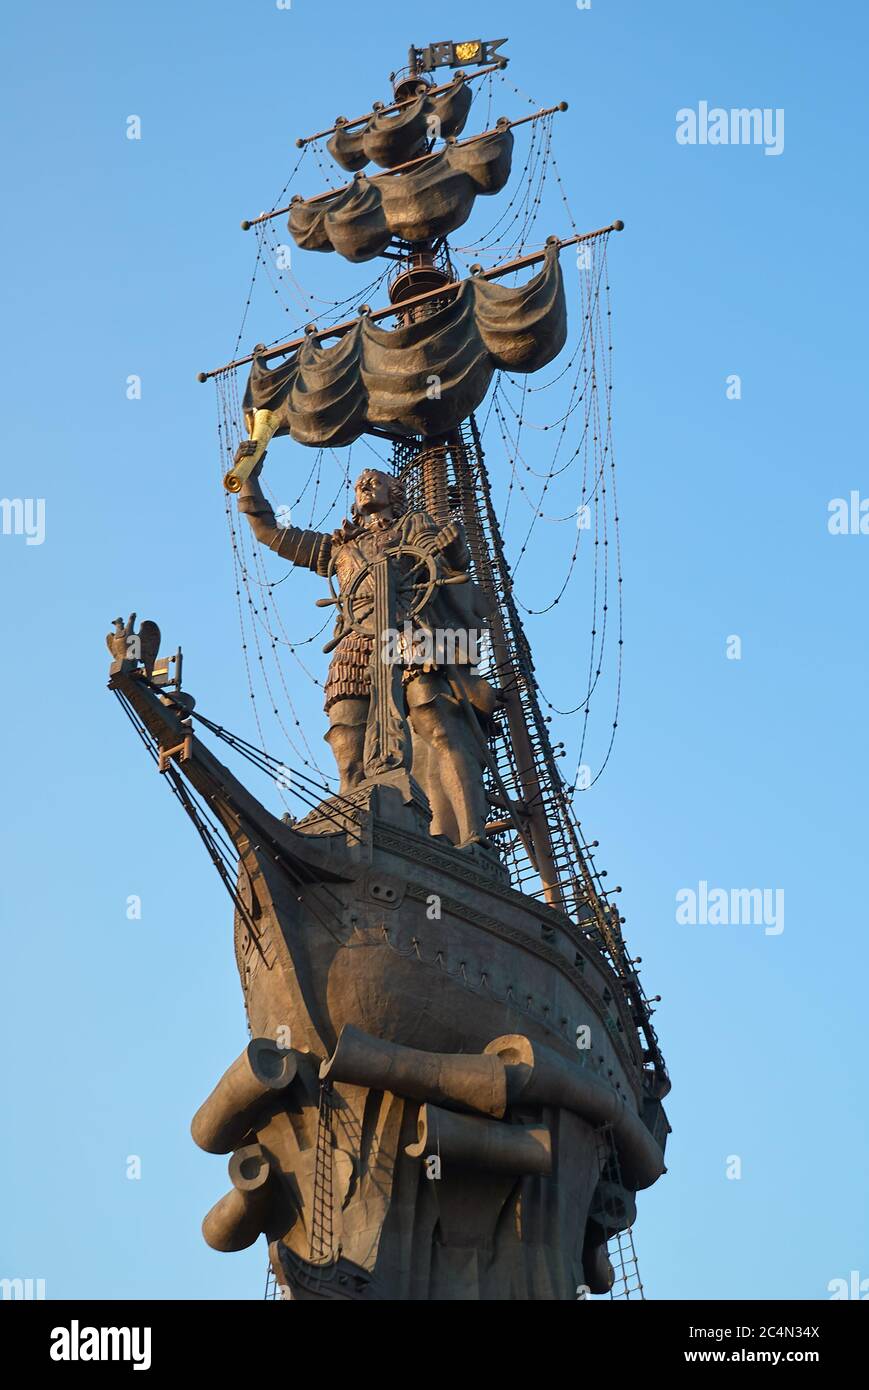 Moscow, Russia - September 04, 2008: Monument to russian Tsar Peter the Great in Moscow. Author Zurab Tsereteli Stock Photo